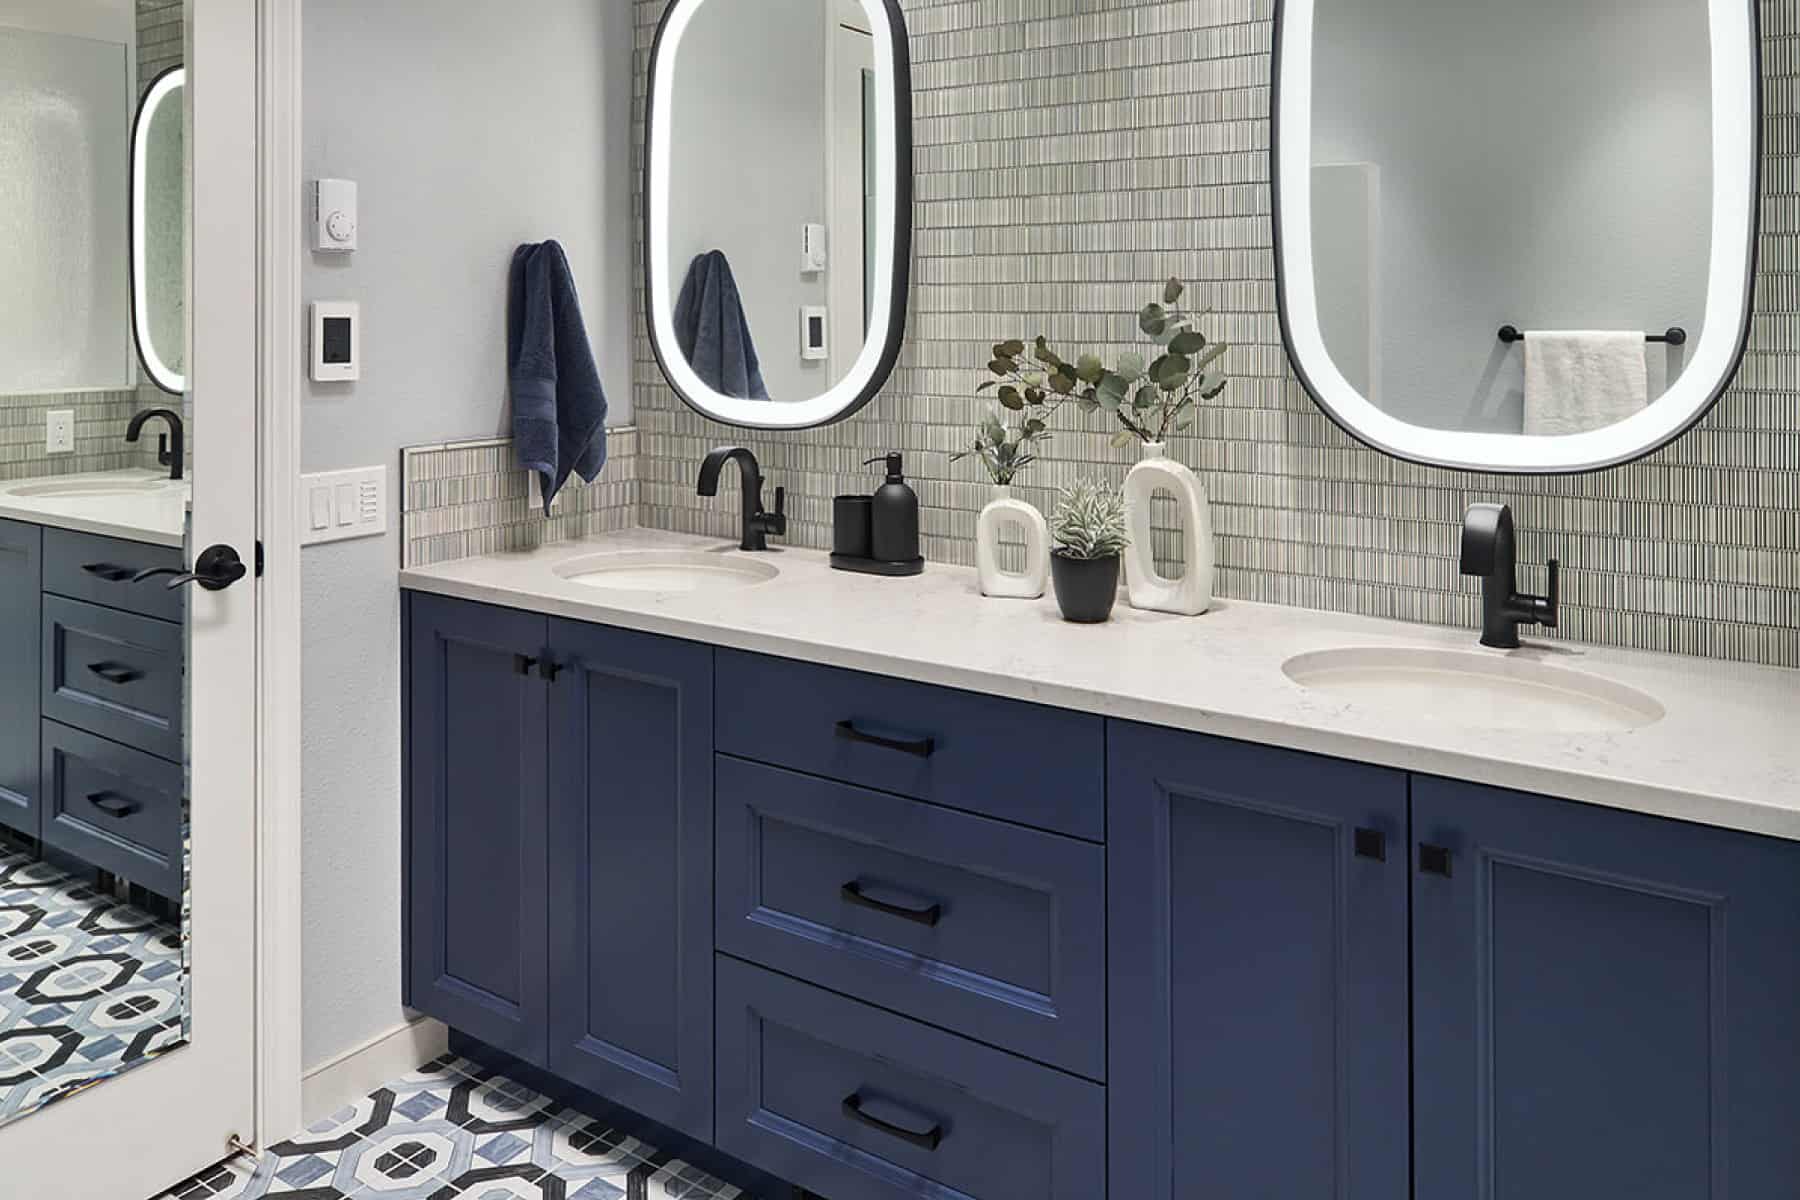 Dual LED lighted vanity mirrors above a double vanity with quartz countertops and deep blue cabinetry from Decor Cabinets.